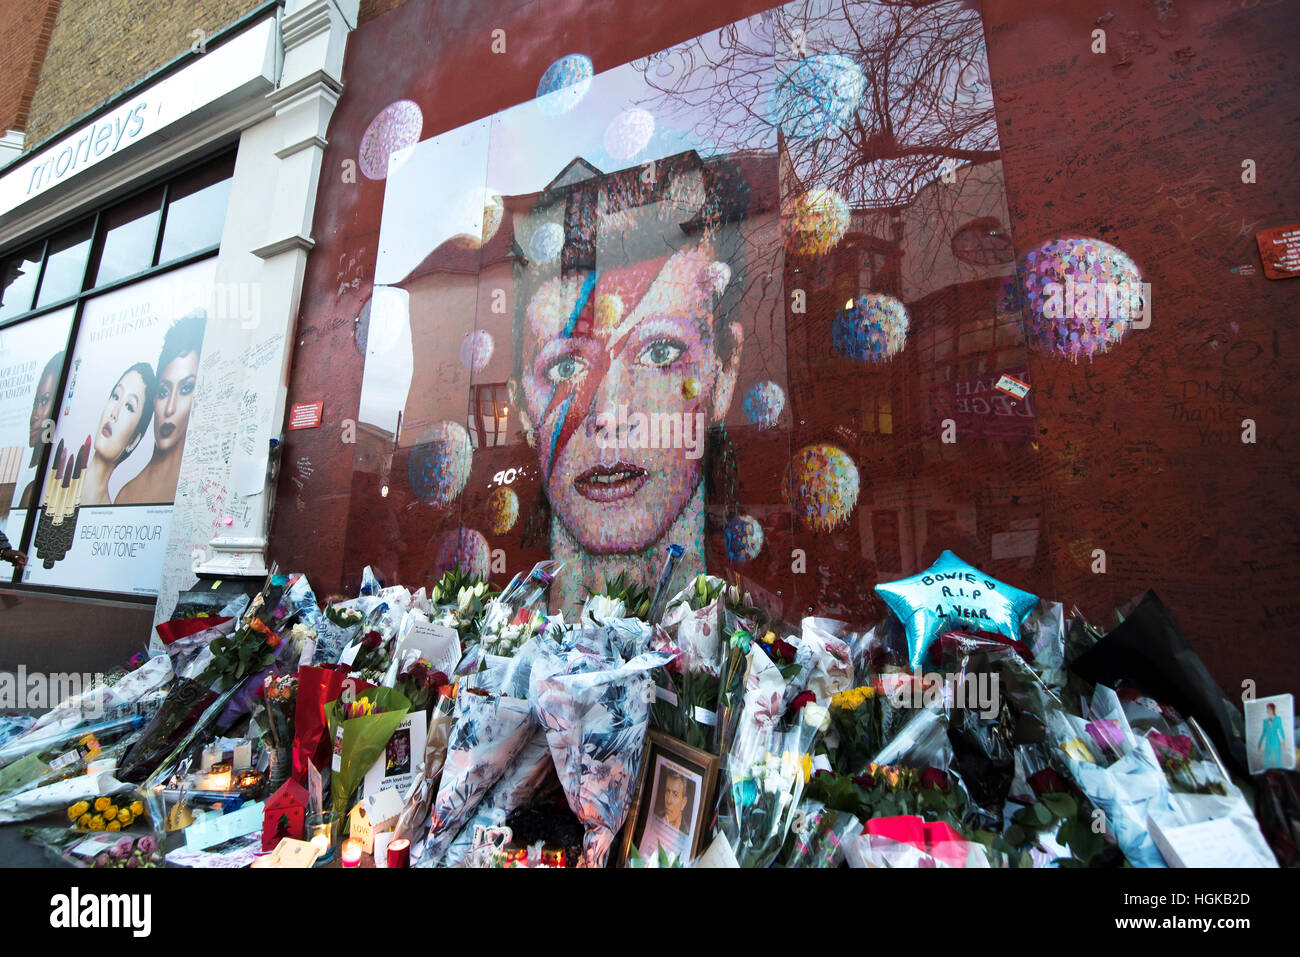 London, UK. 10th January, 2017. Flowers and tributes are placed by an art work of David Bowie on a wall at Brixton, on the first death anniversary of his death, just two days after his 69th birthday in London, UK.Credit: Alberto Pezzali/Pacific Press/Alamy Live News Stock Photo